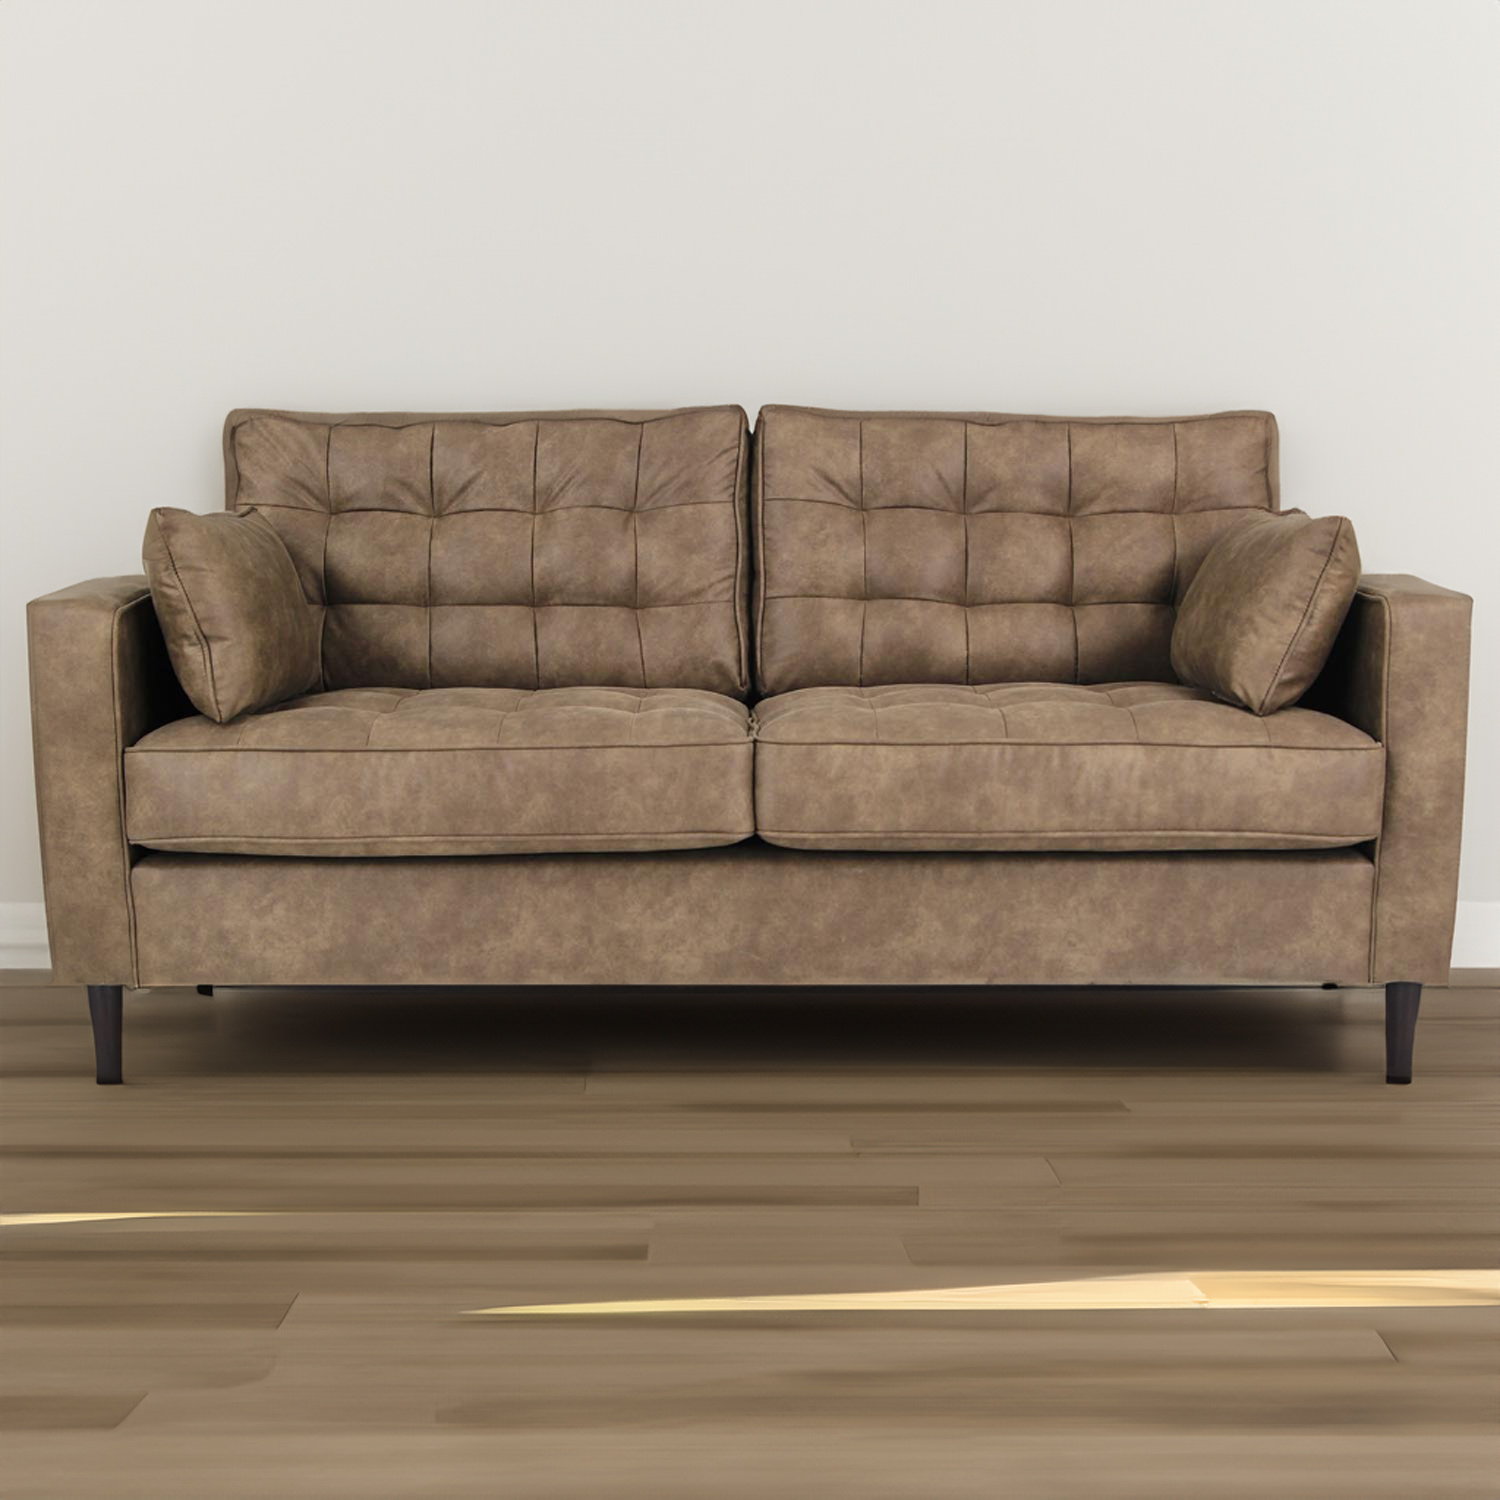 Anabelle 3 Seater Brown Fabric Sofa Image 1